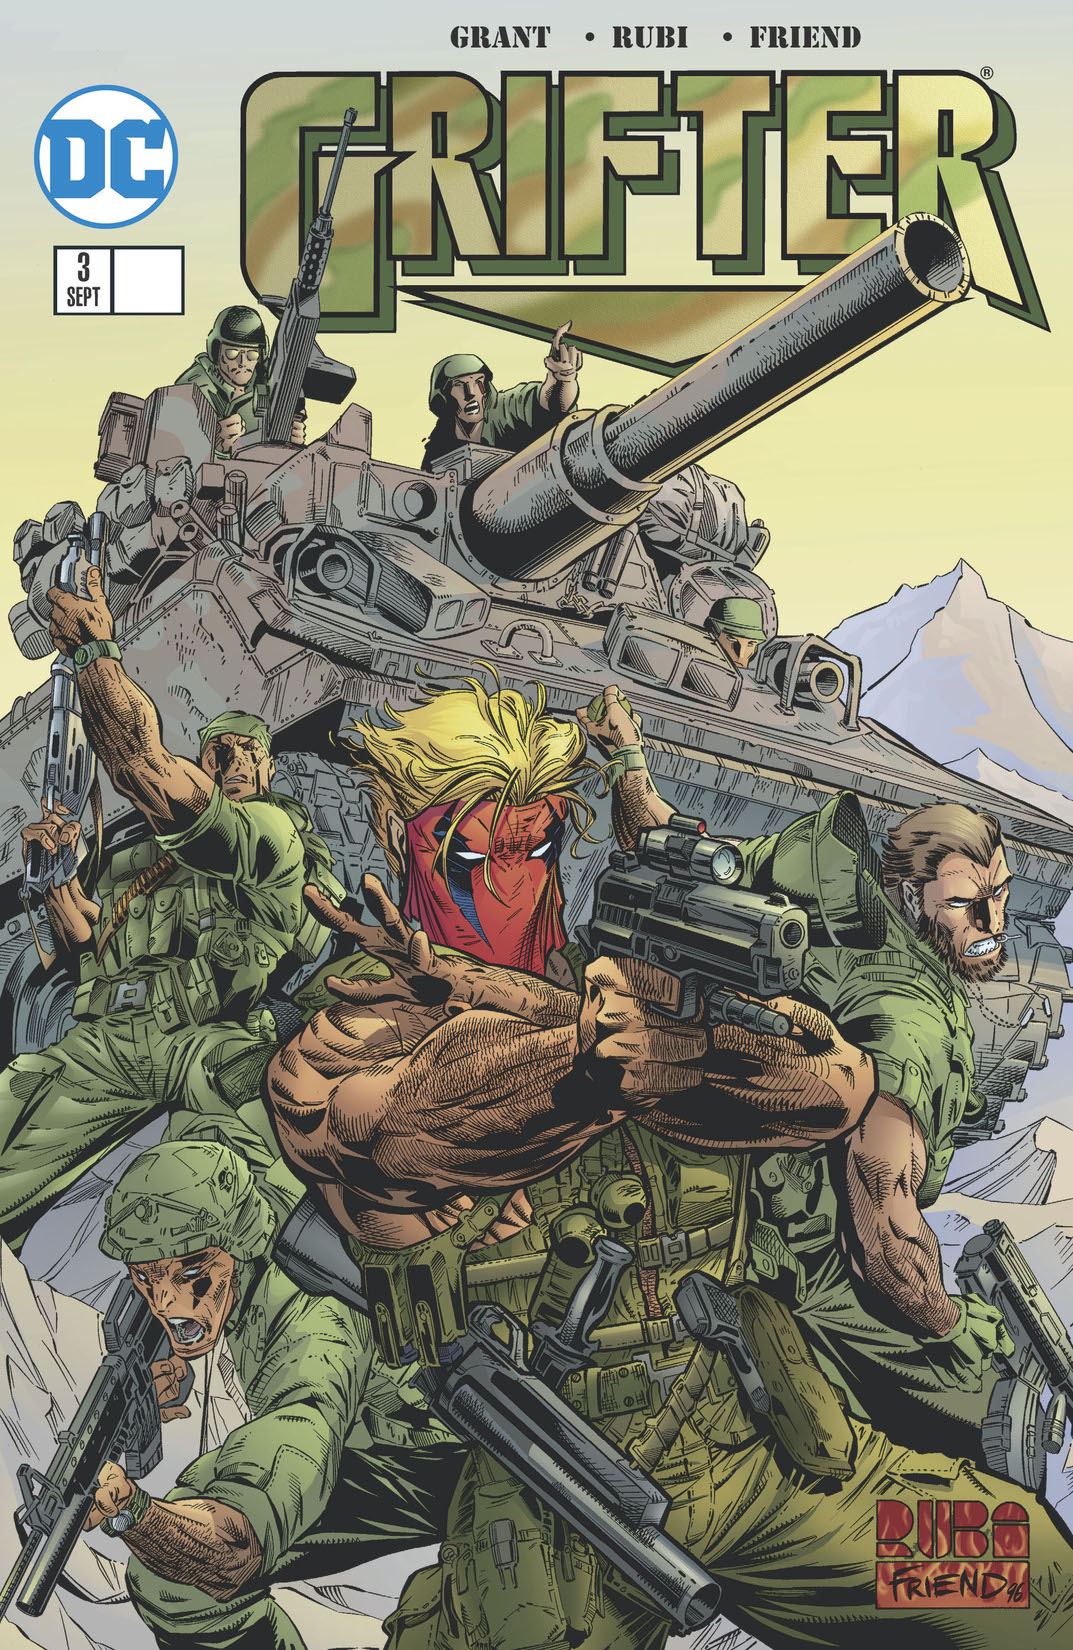 Grifter (1996-1997) #3 preview images